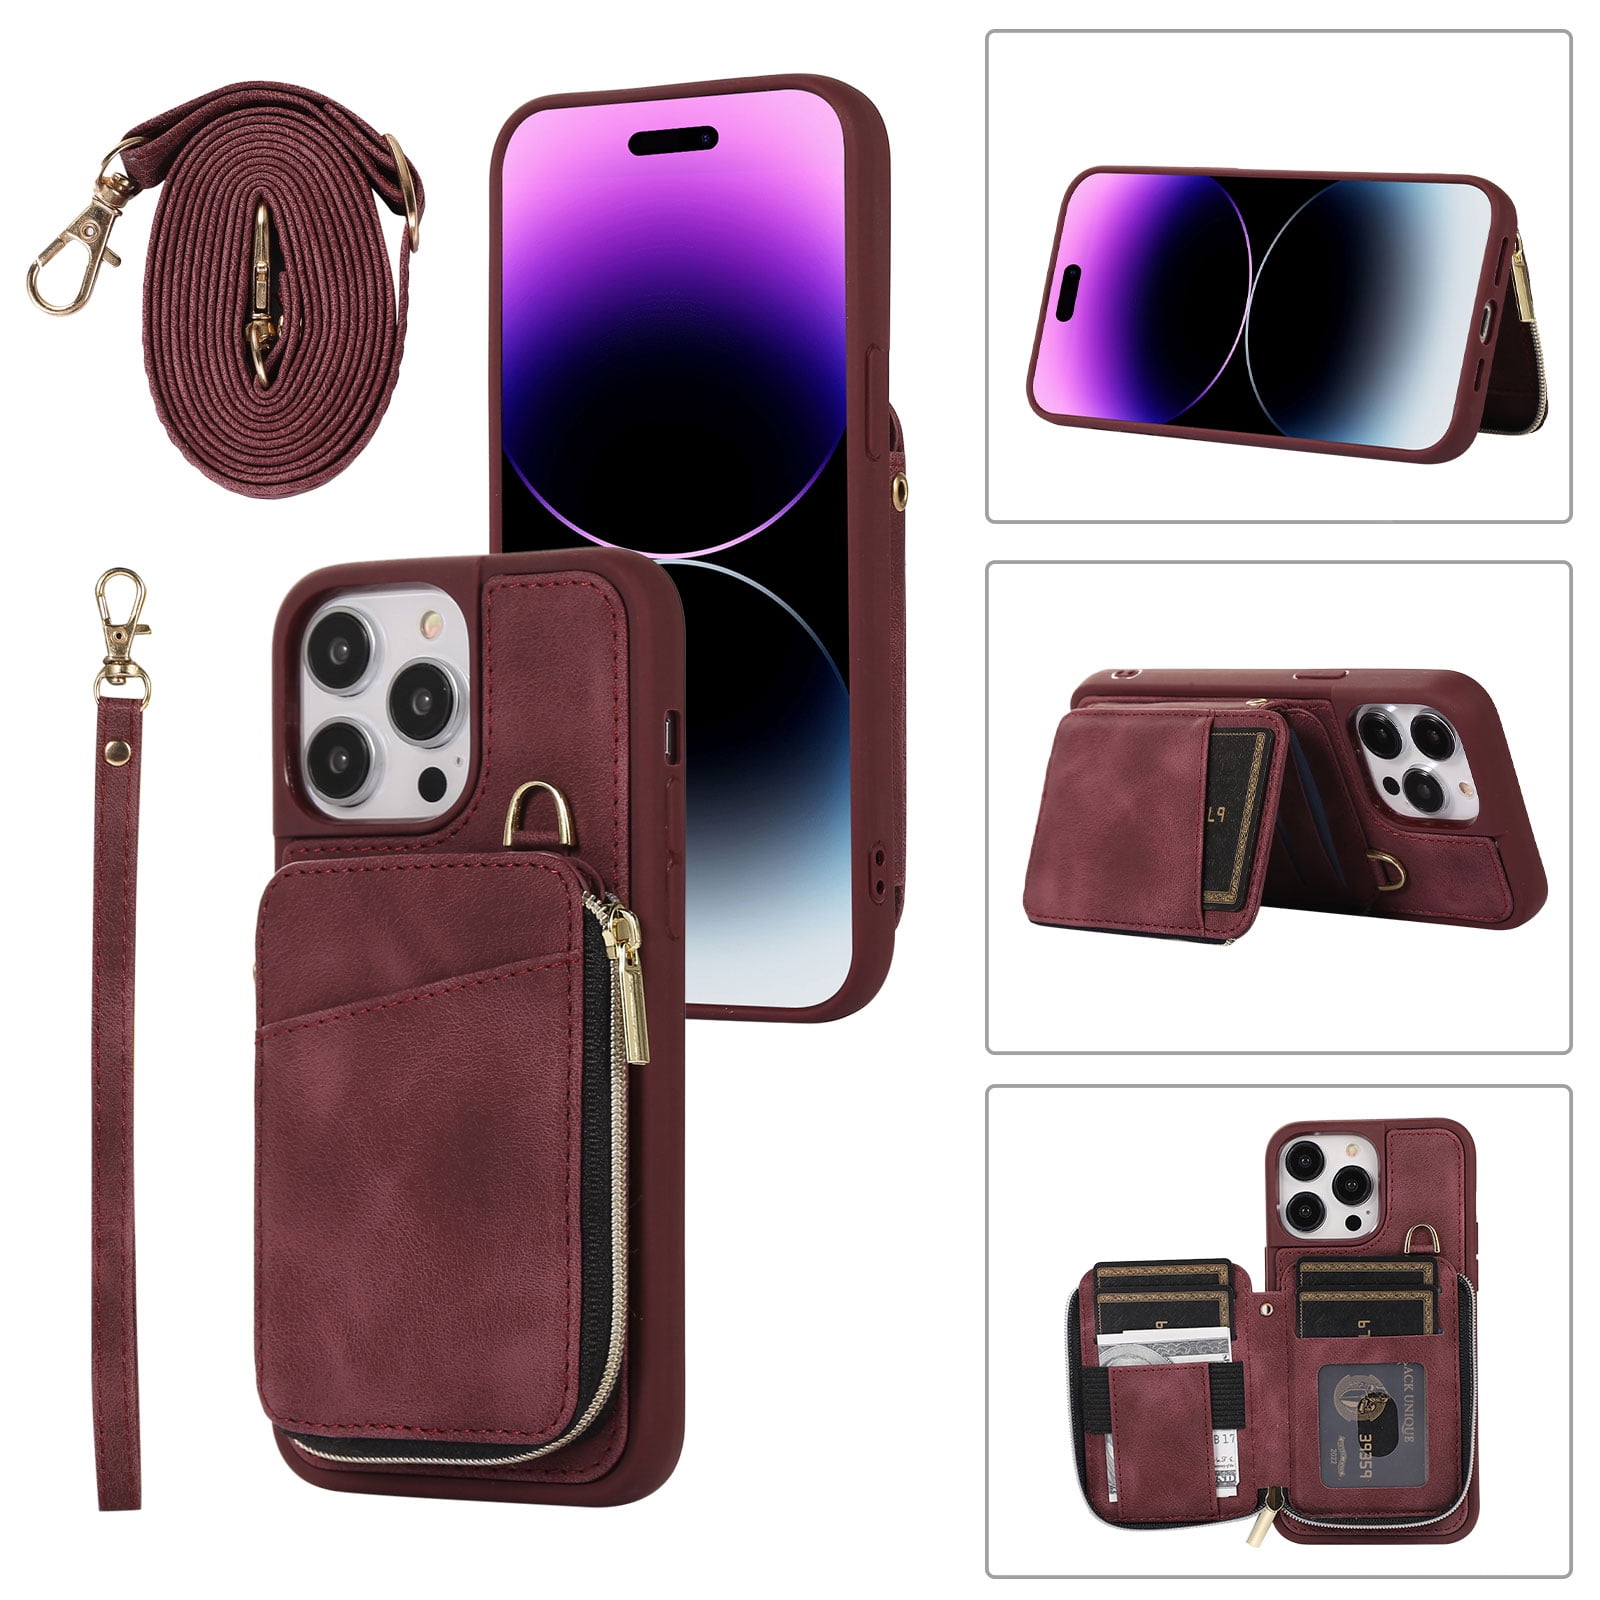  CUSTYPE for iPhone 13 Pro Max Case Wallet with Card Holder for  Women, Crossbody Zipper Case with Strap Wrist, Protective Leather Case  Purse with Ring for Apple iPhone 13 Pro Max